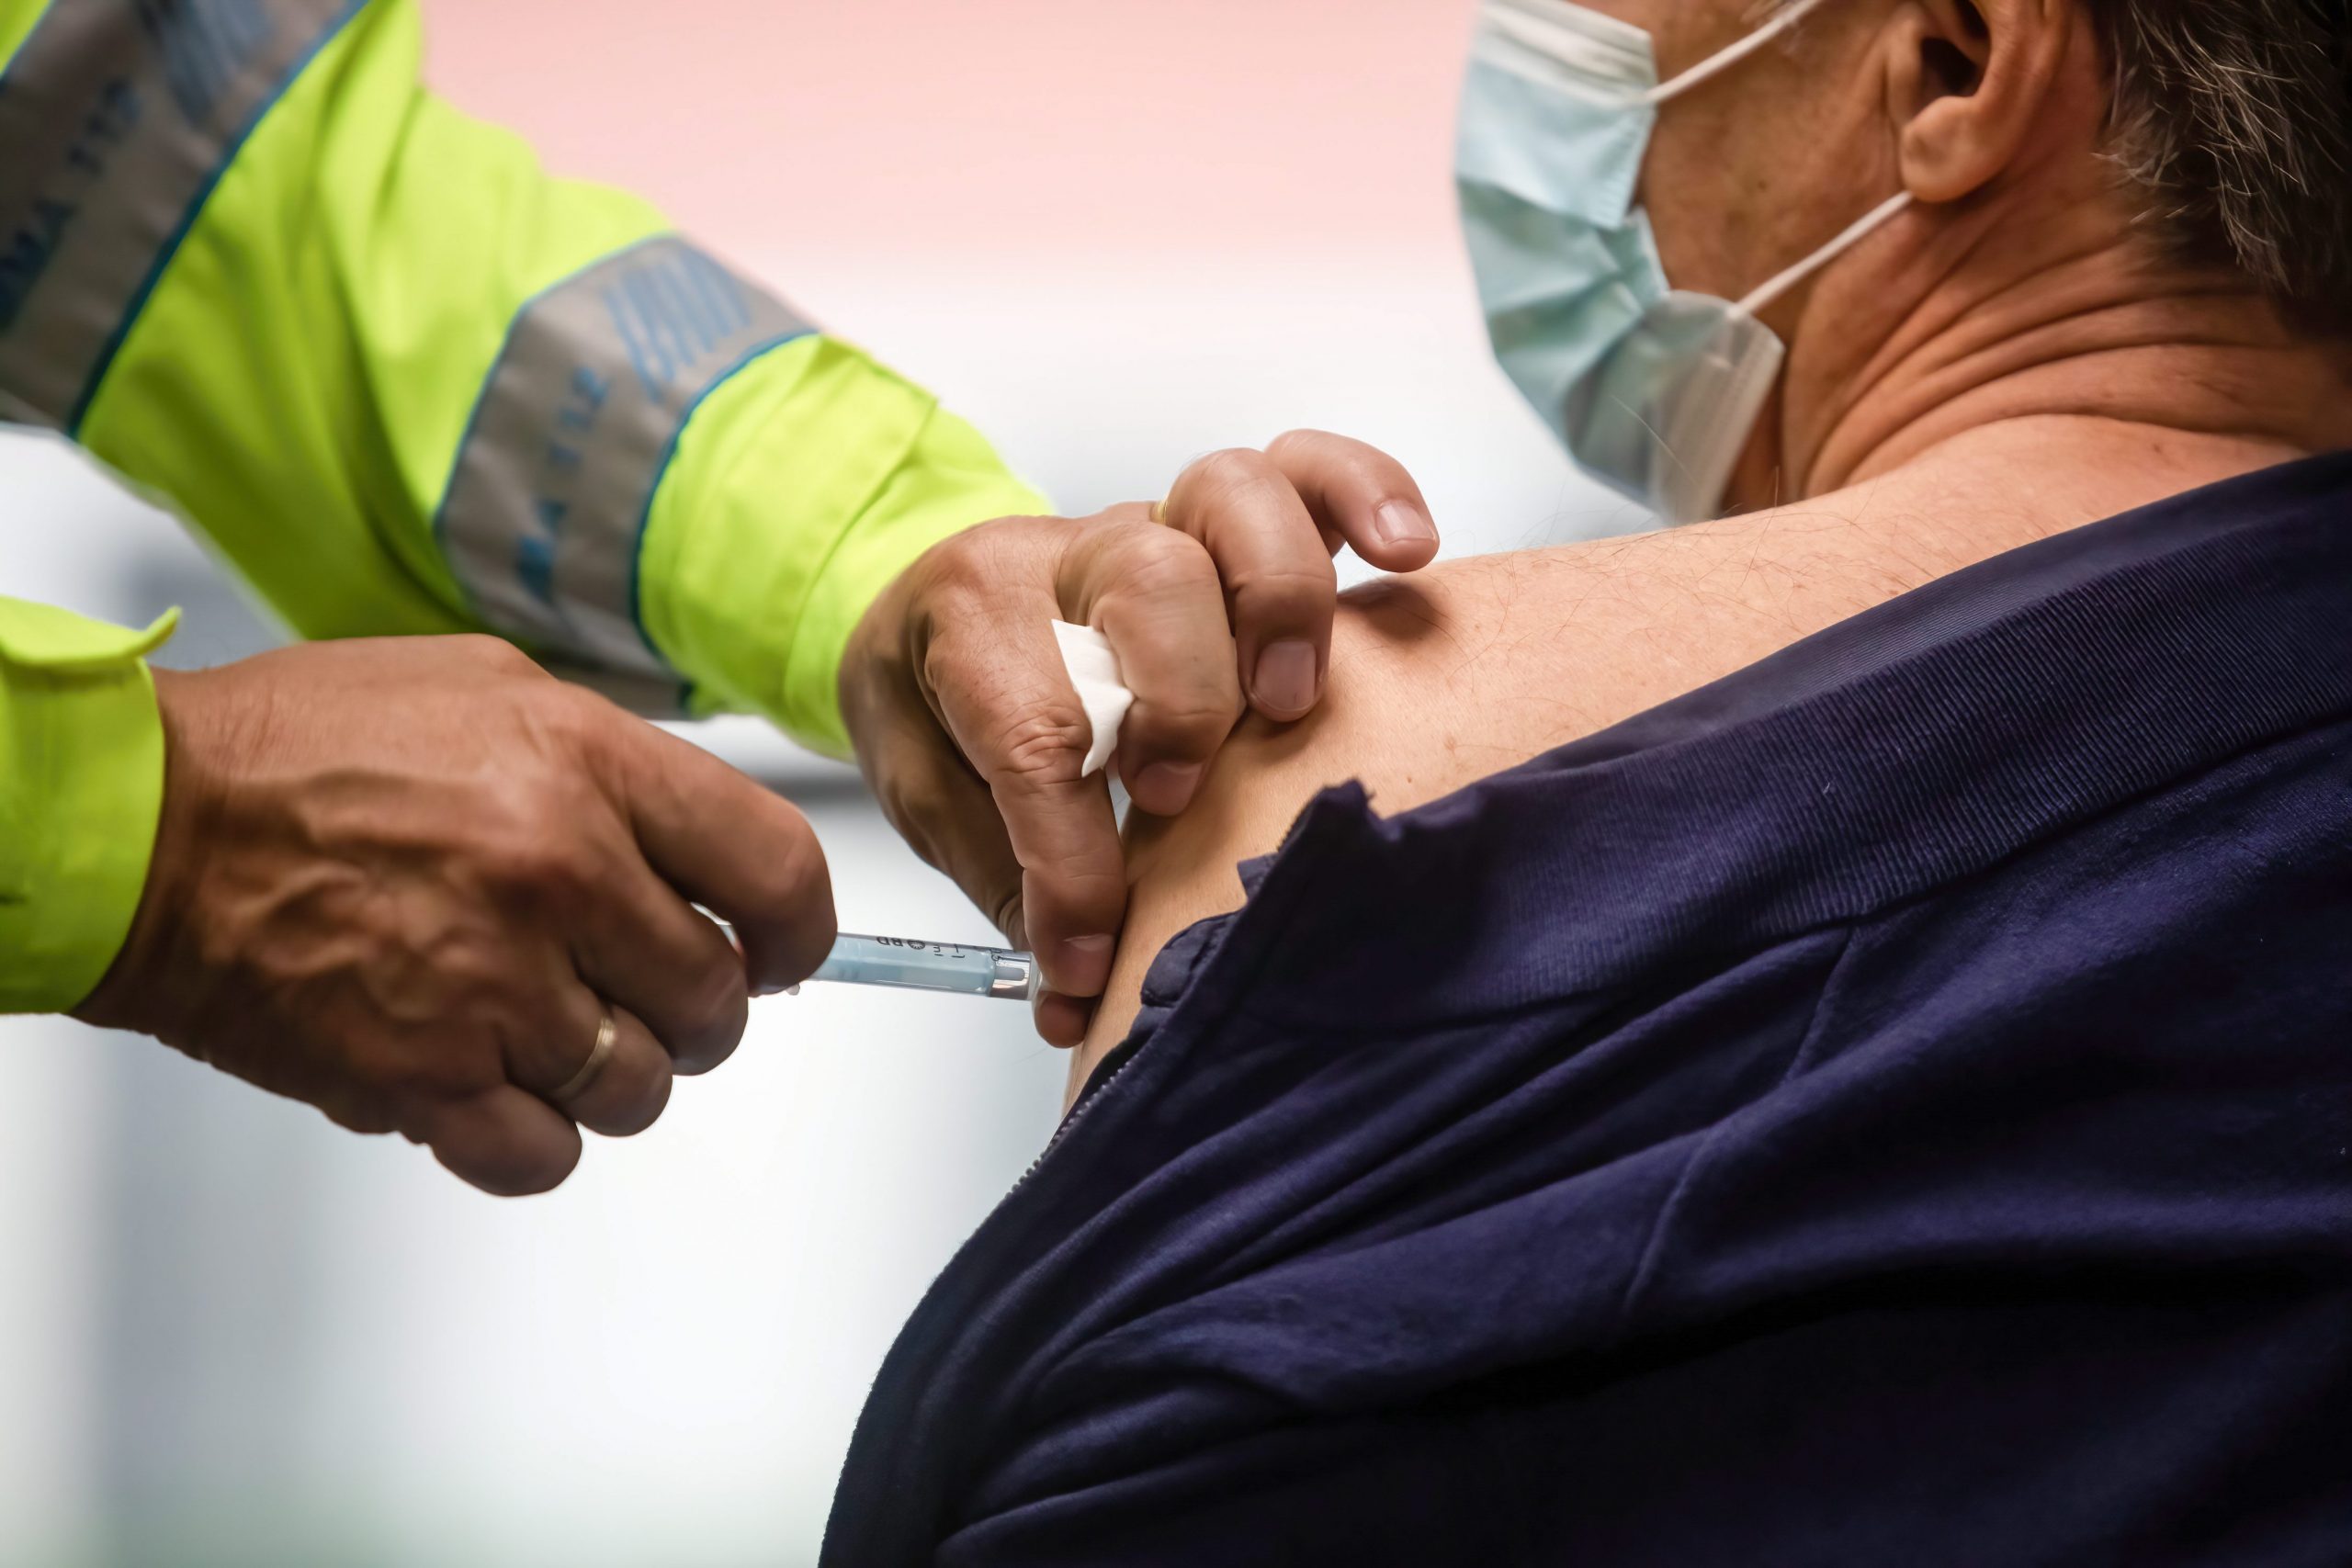 COVID-19 boosters and flu vaccine shots will be offered at the same time in some parts of Spain